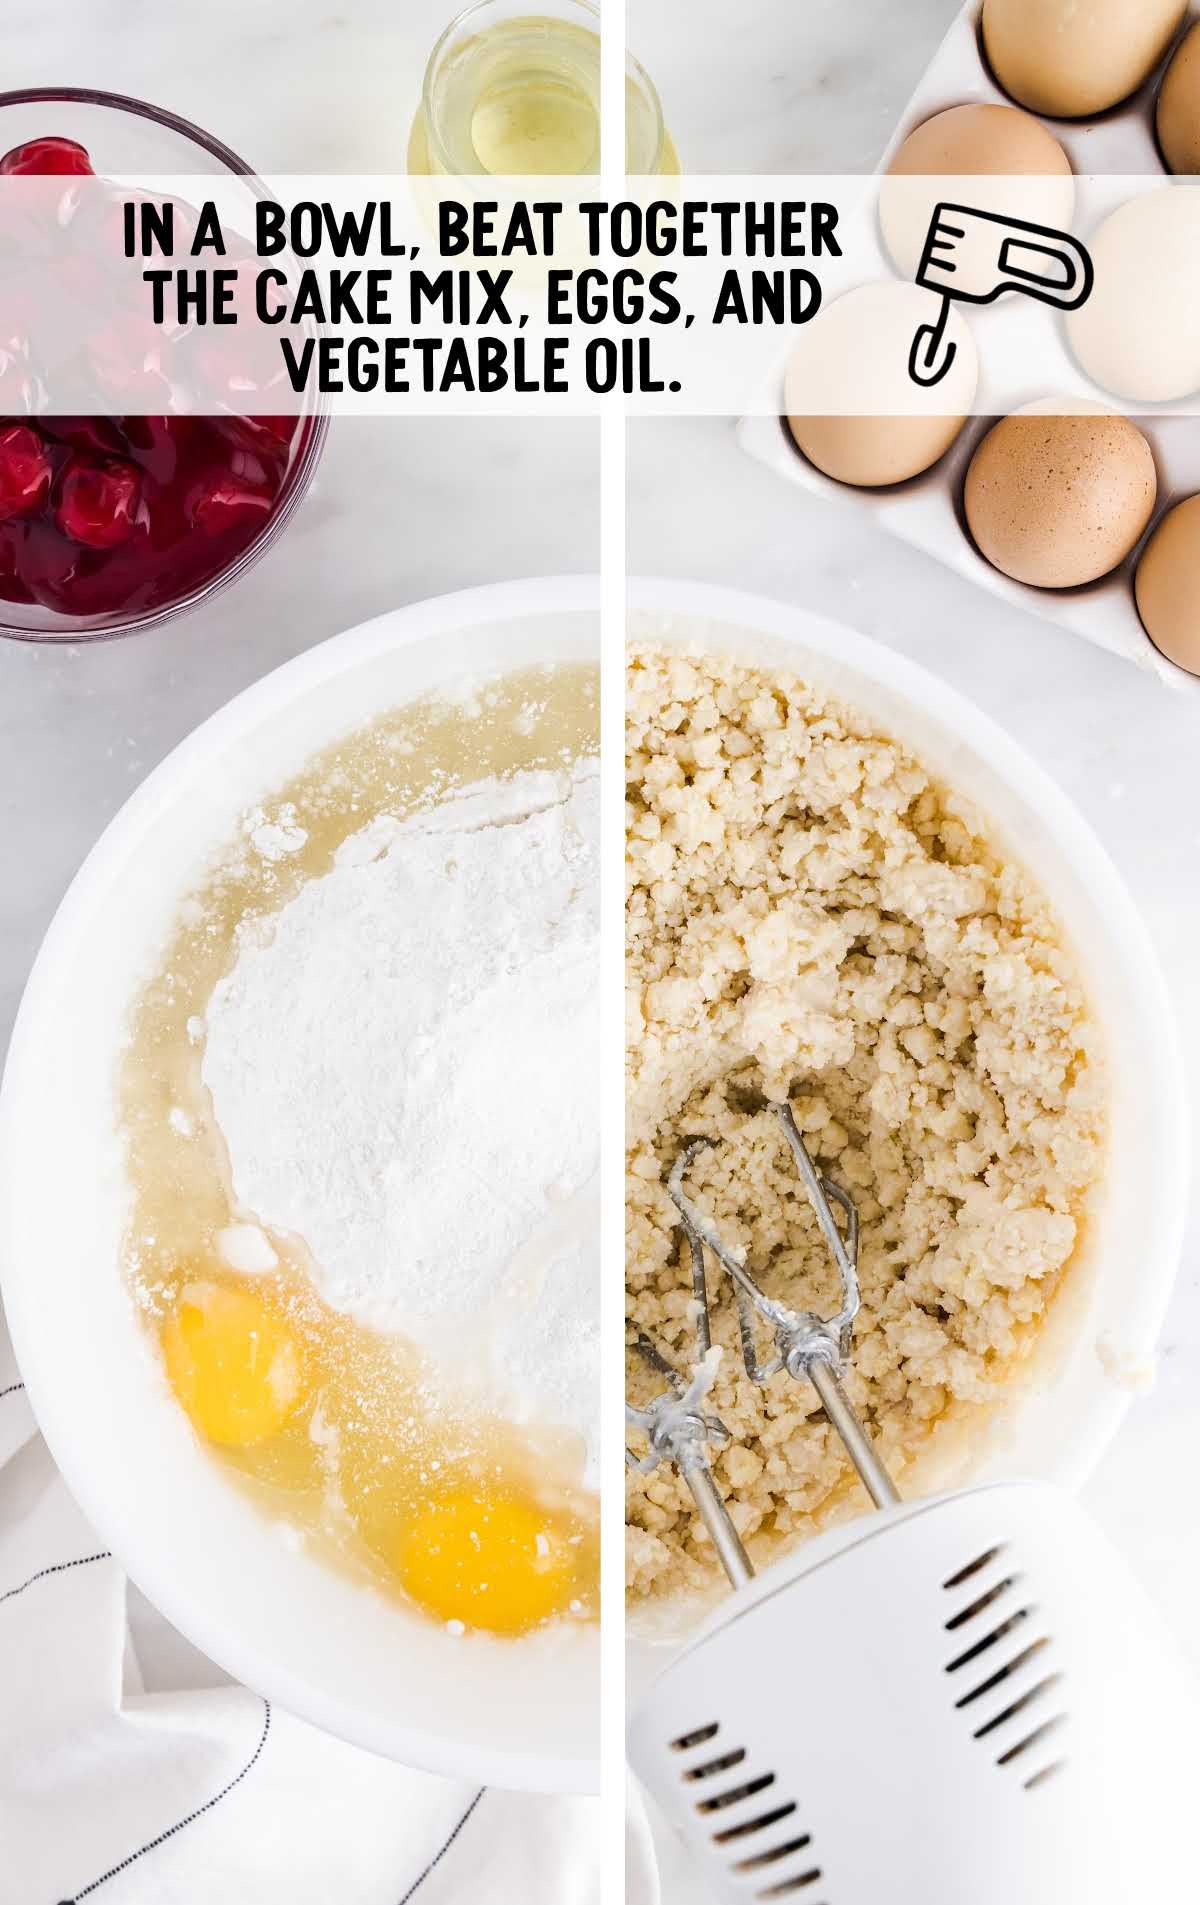 ake mix, eggs, and vegetable oil combined in a bowl